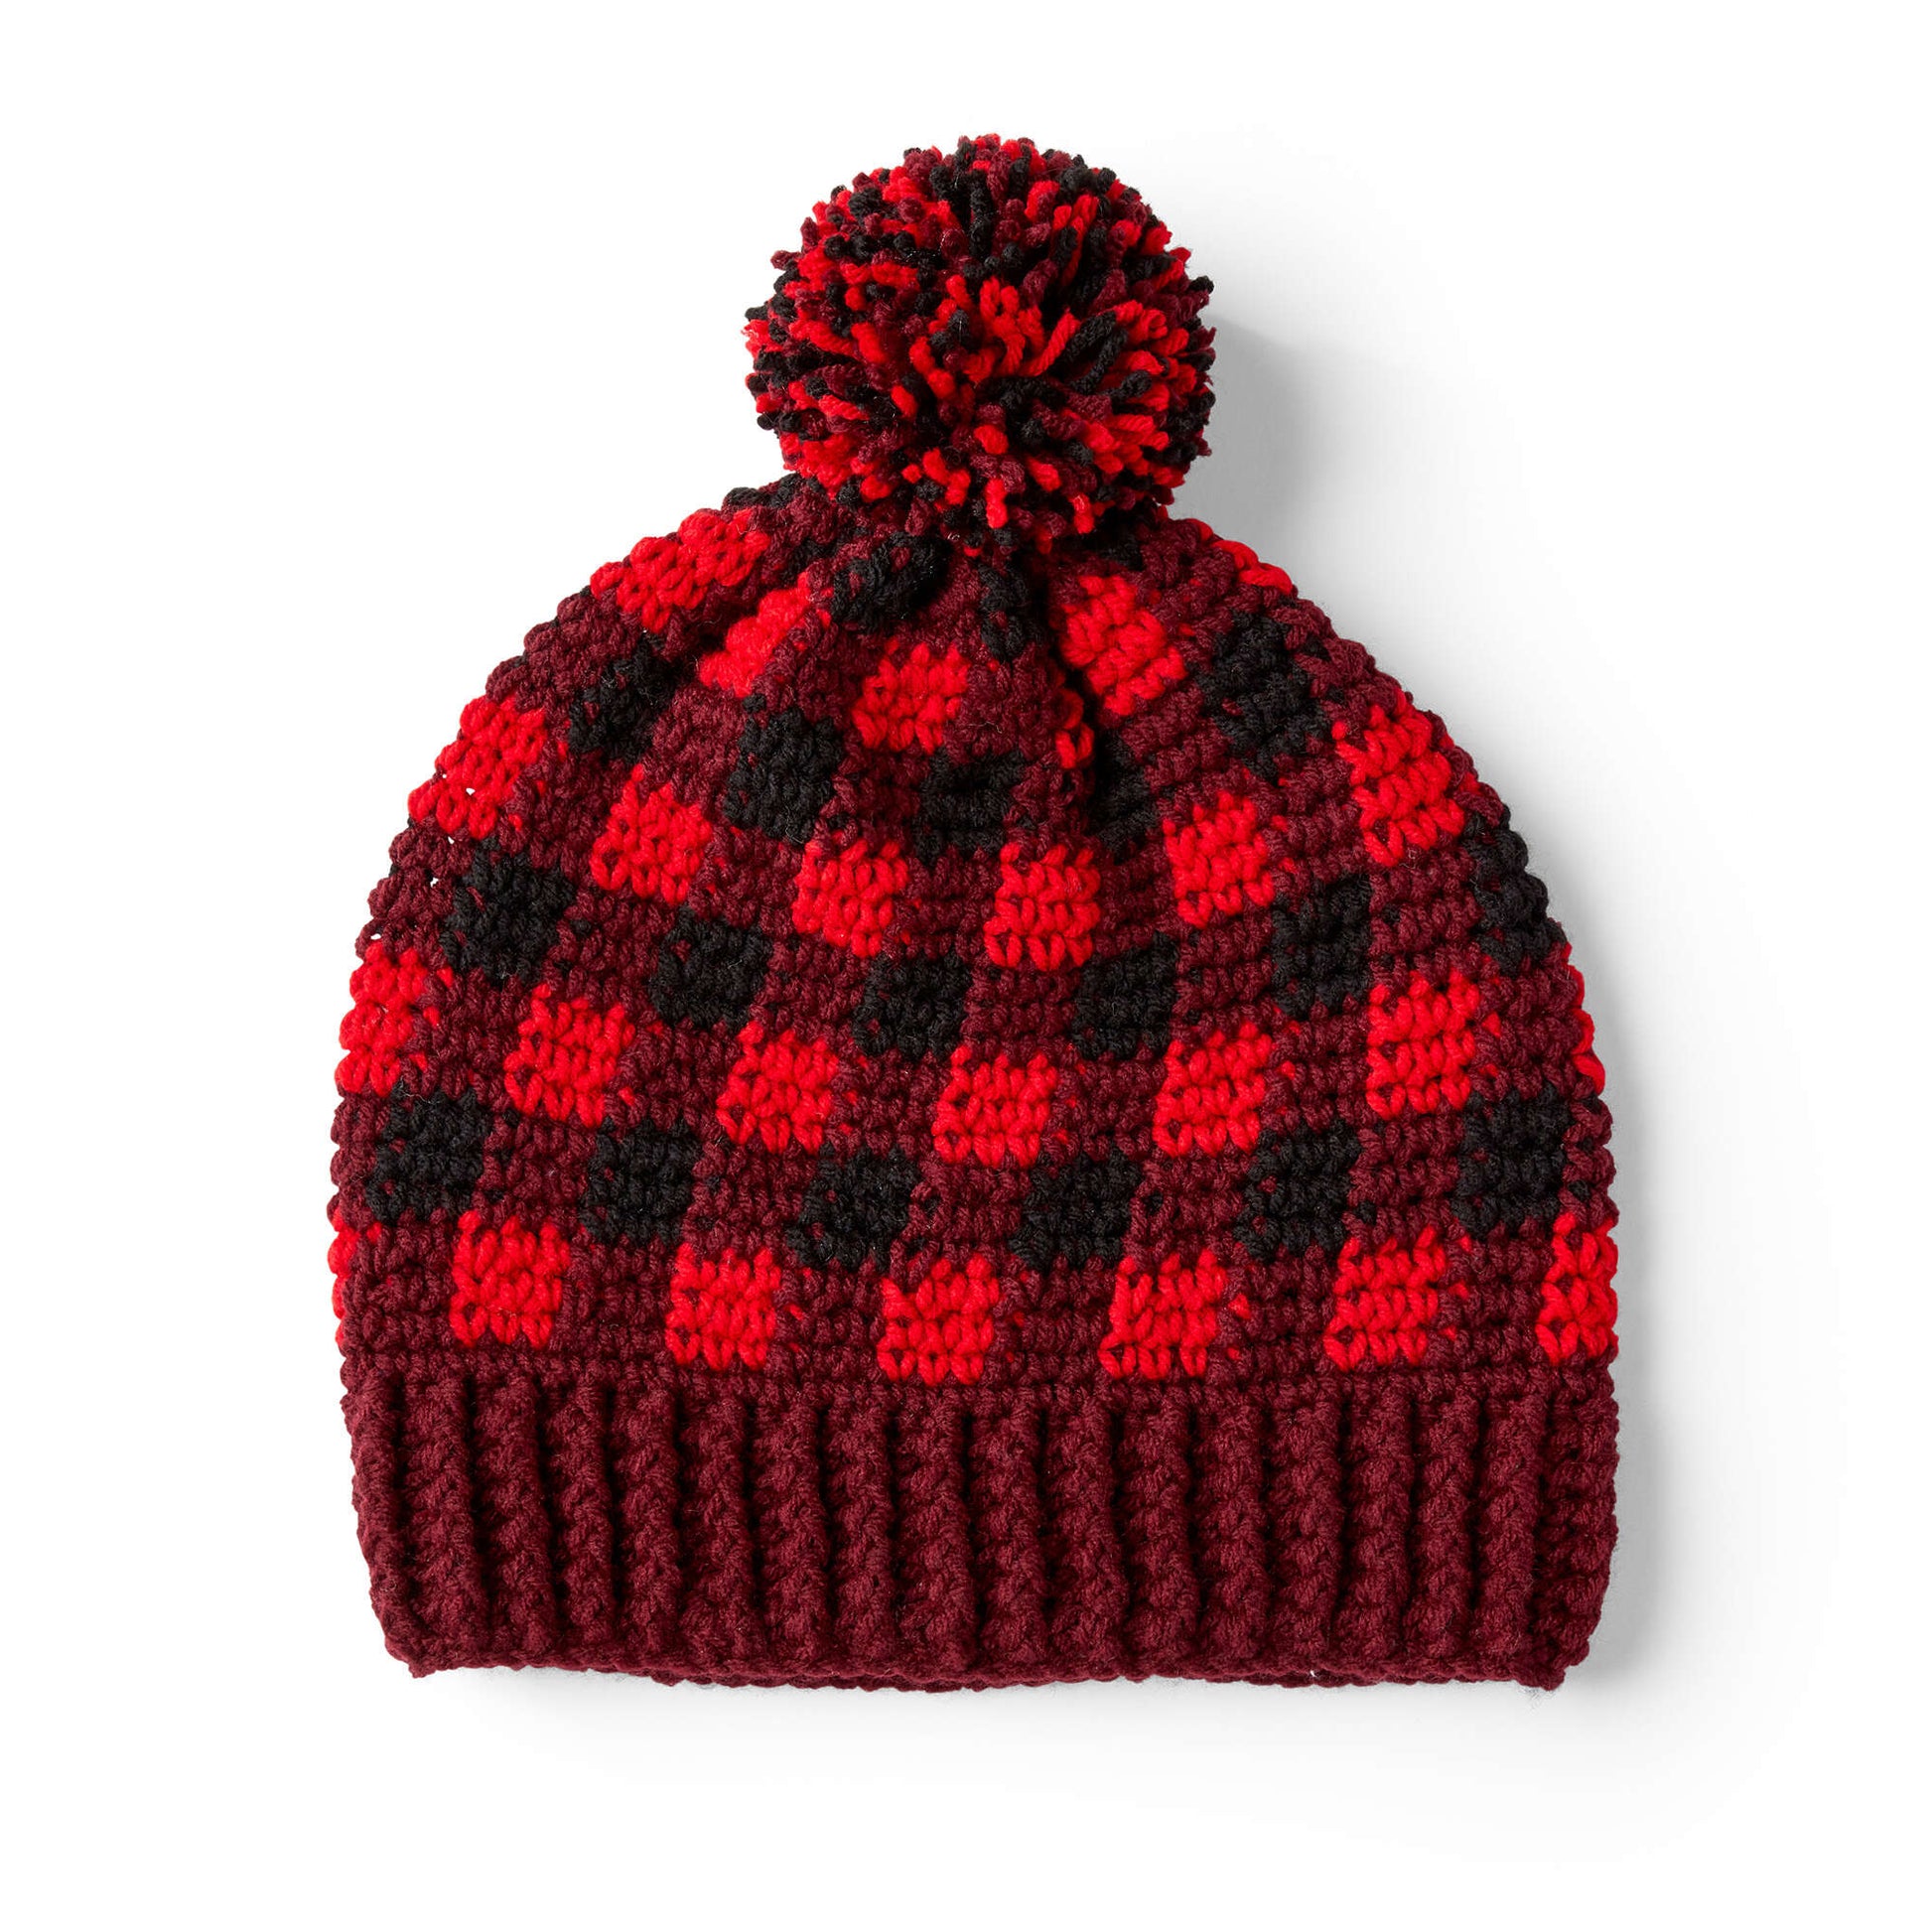 Free Red Heart Buffalo Plaid Crochet Hat For Him Pattern